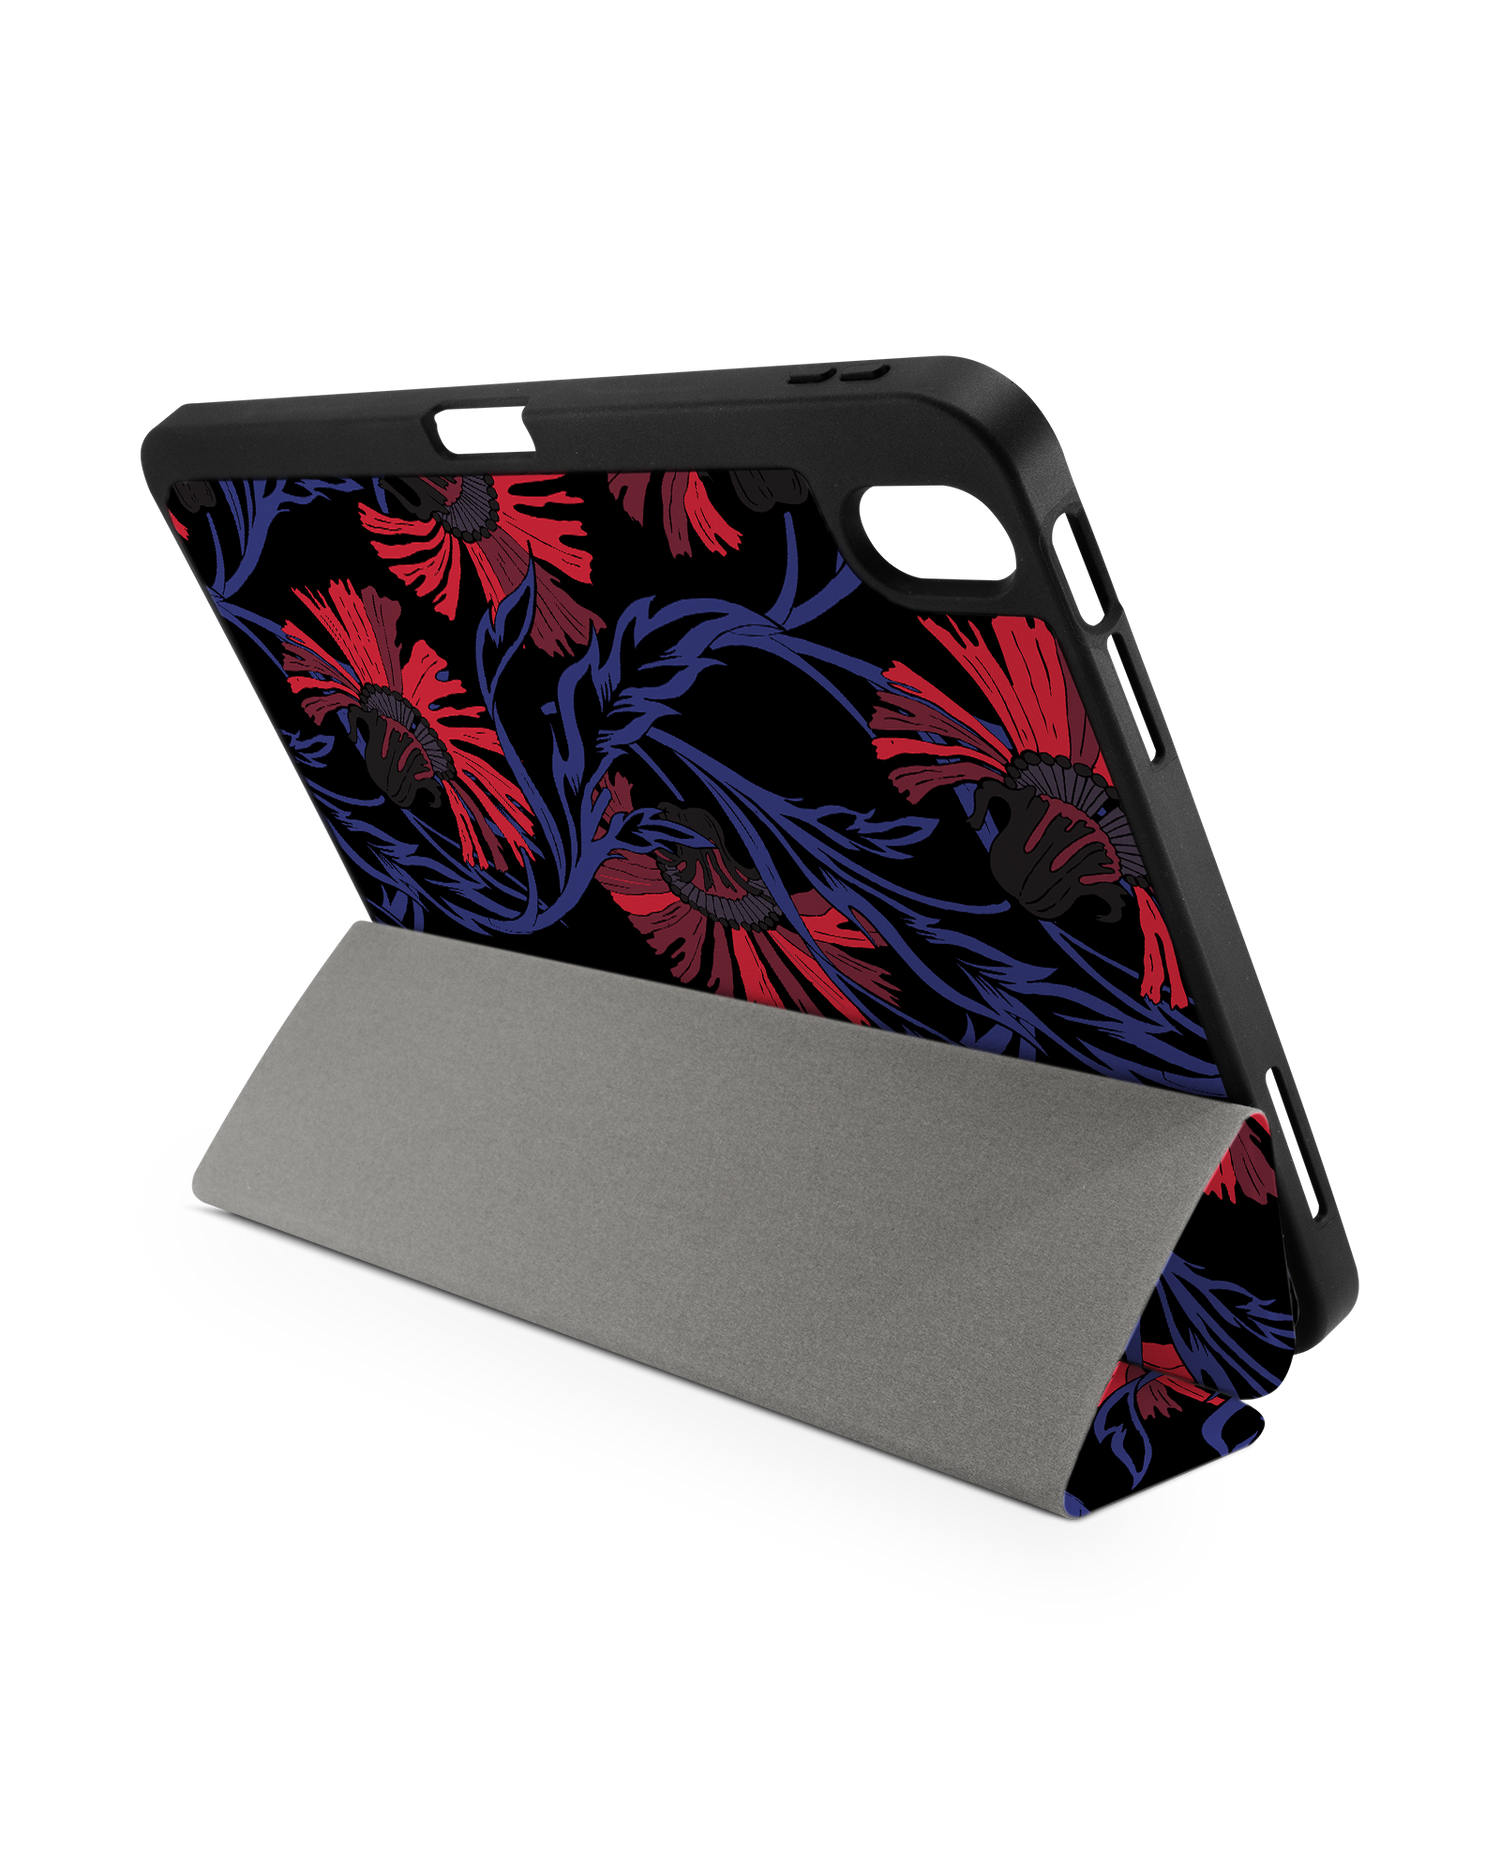 Midnight Floral iPad Case with Pencil Holder for Apple iPad (10th Generation): Set up in landscape format (back view)